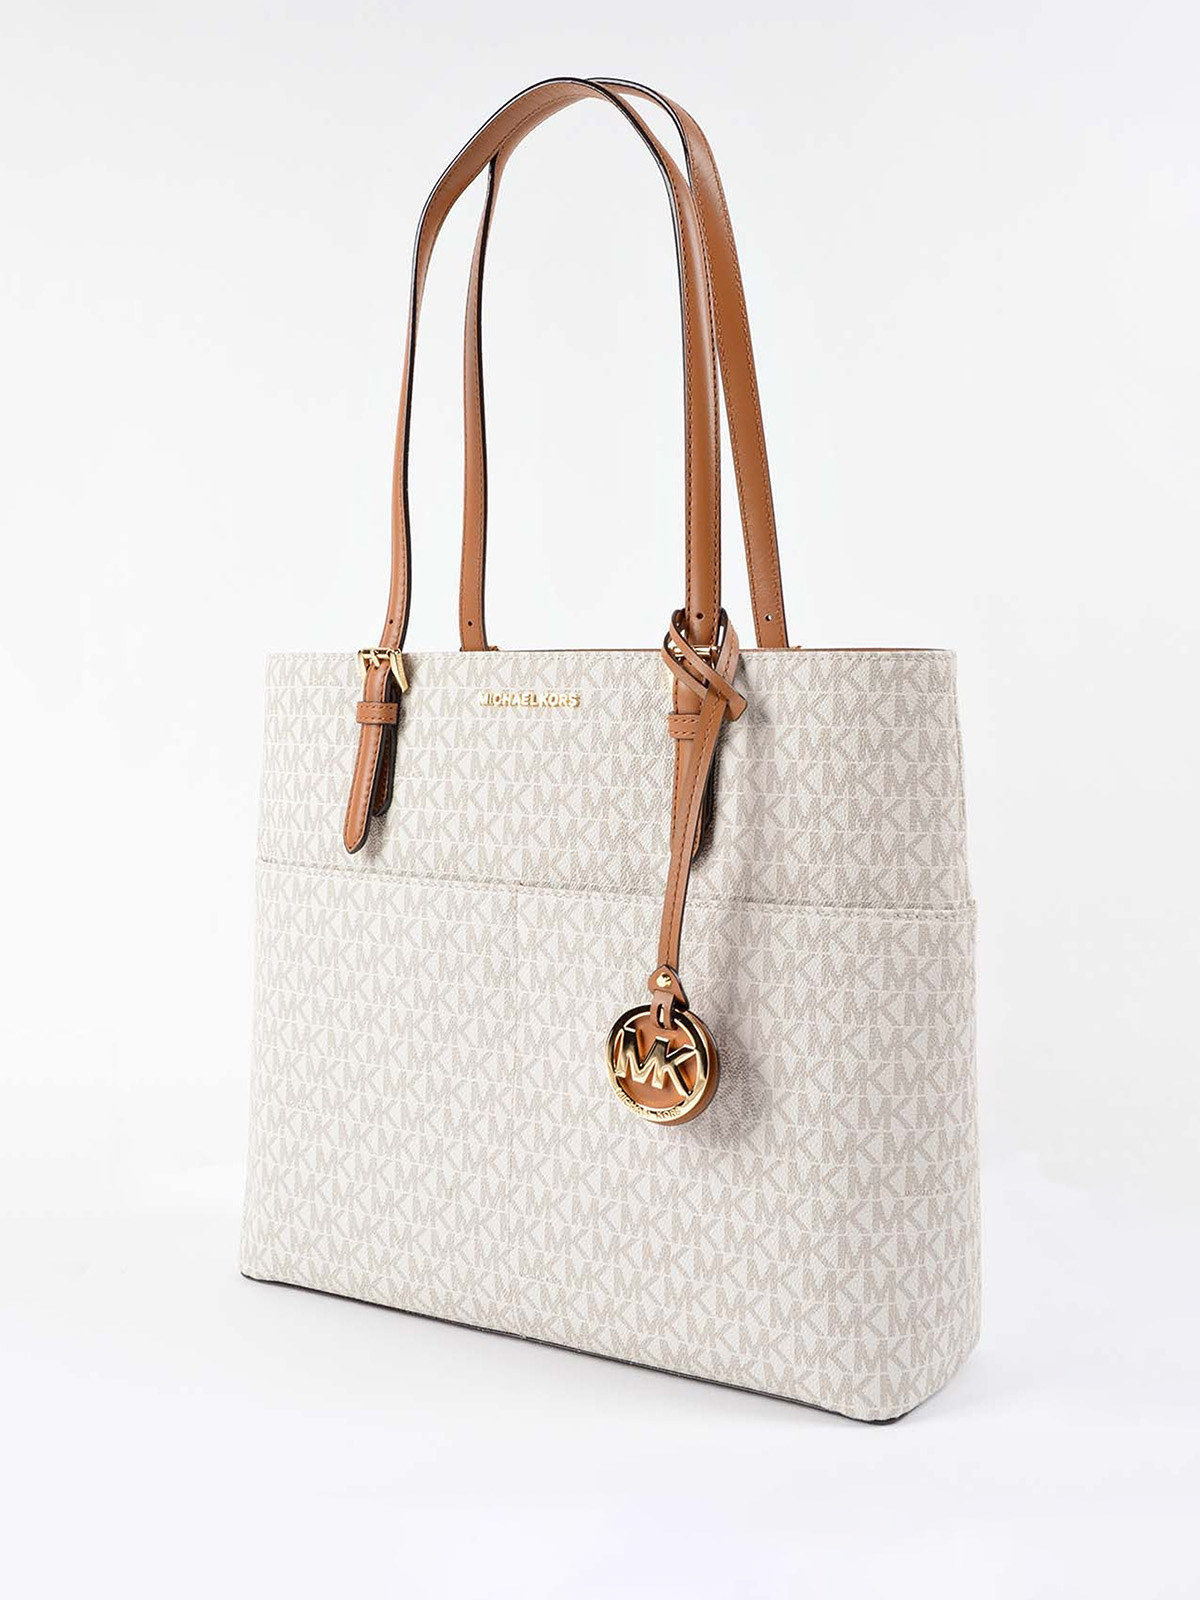 Bedford large tote by Michael Kors - totes bags | Shop online at 0 - 30S7GBFT3V150